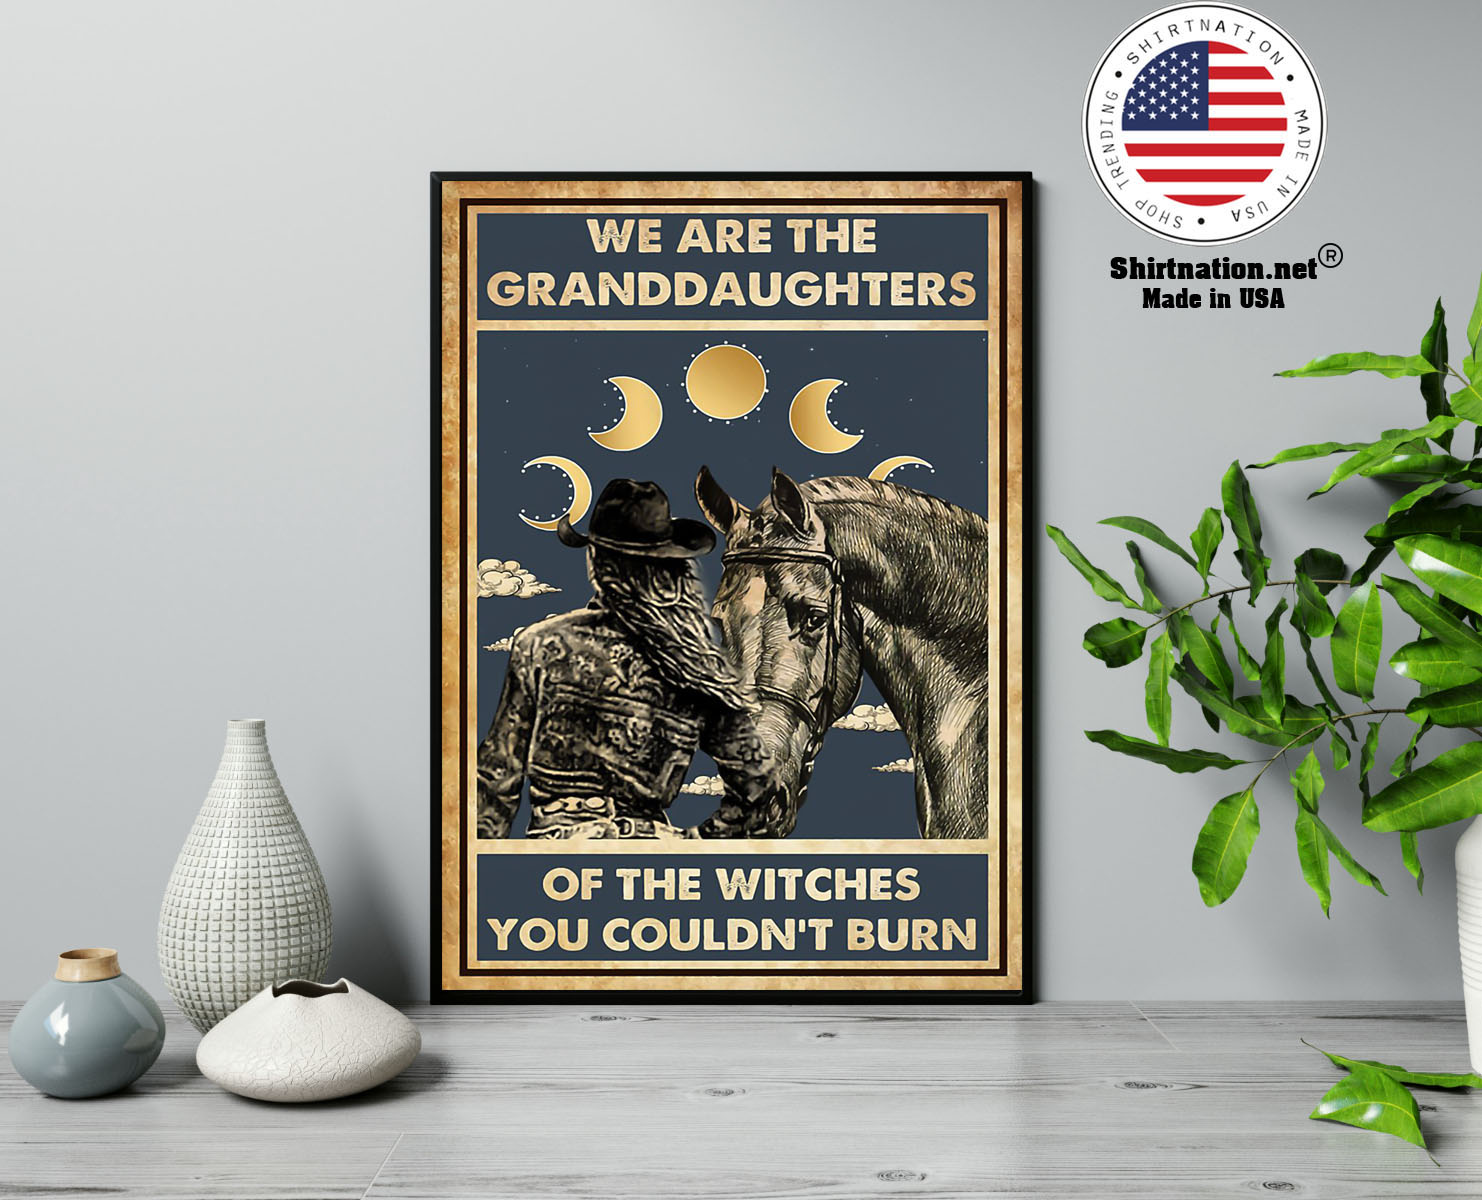 We are the granddaughters of the withches you coundnt burn poster 13